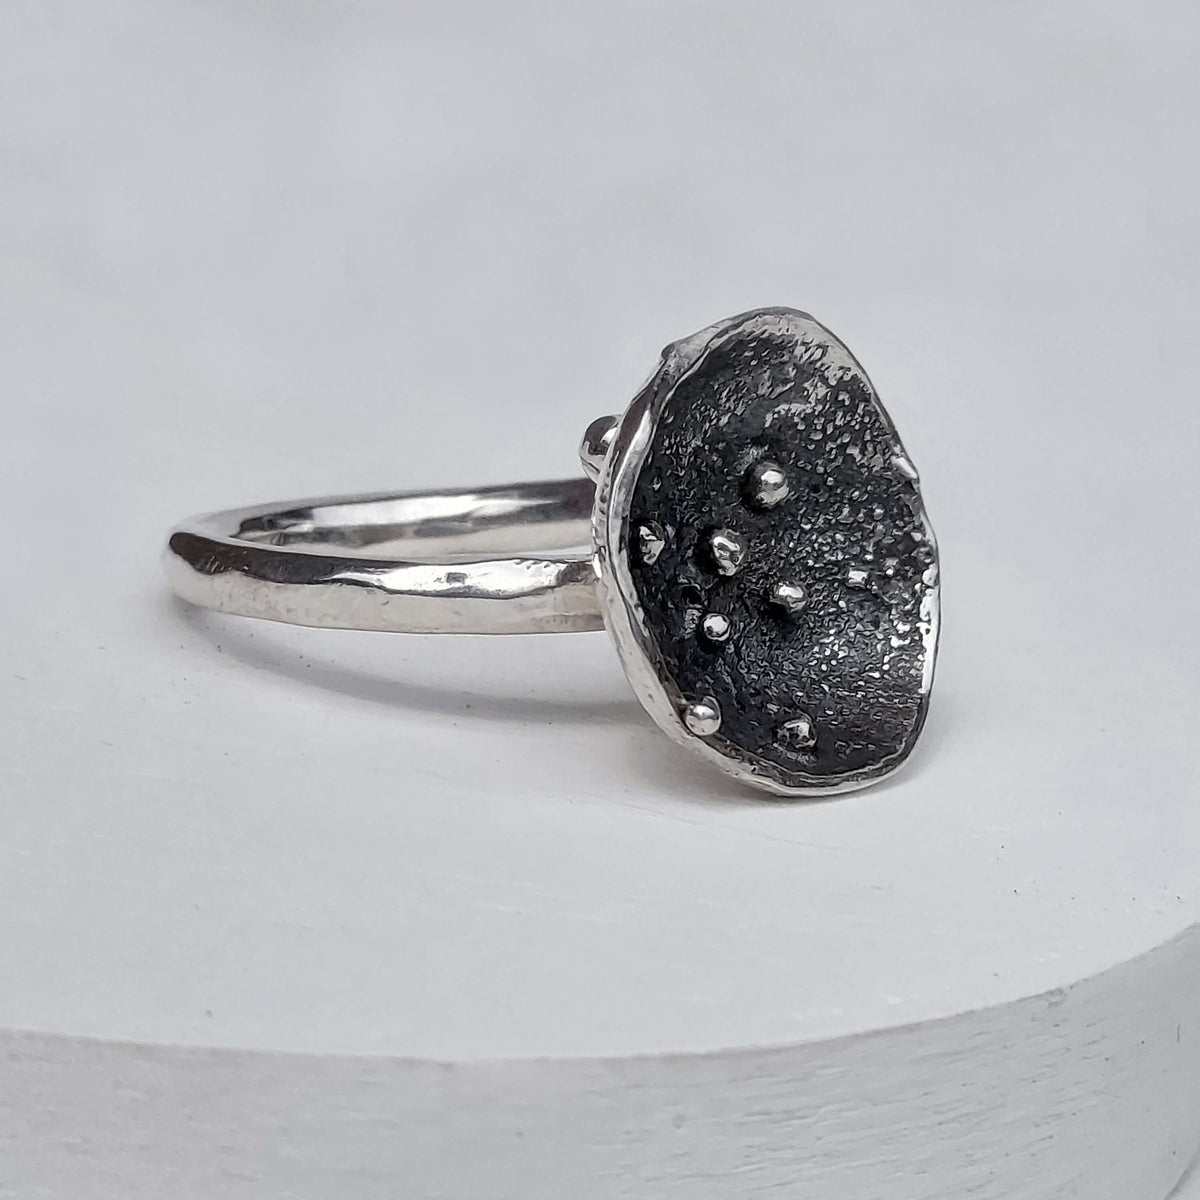 fashion ring, simple silver ring for all sizes, handmade jewelry by Roffjewellery.com